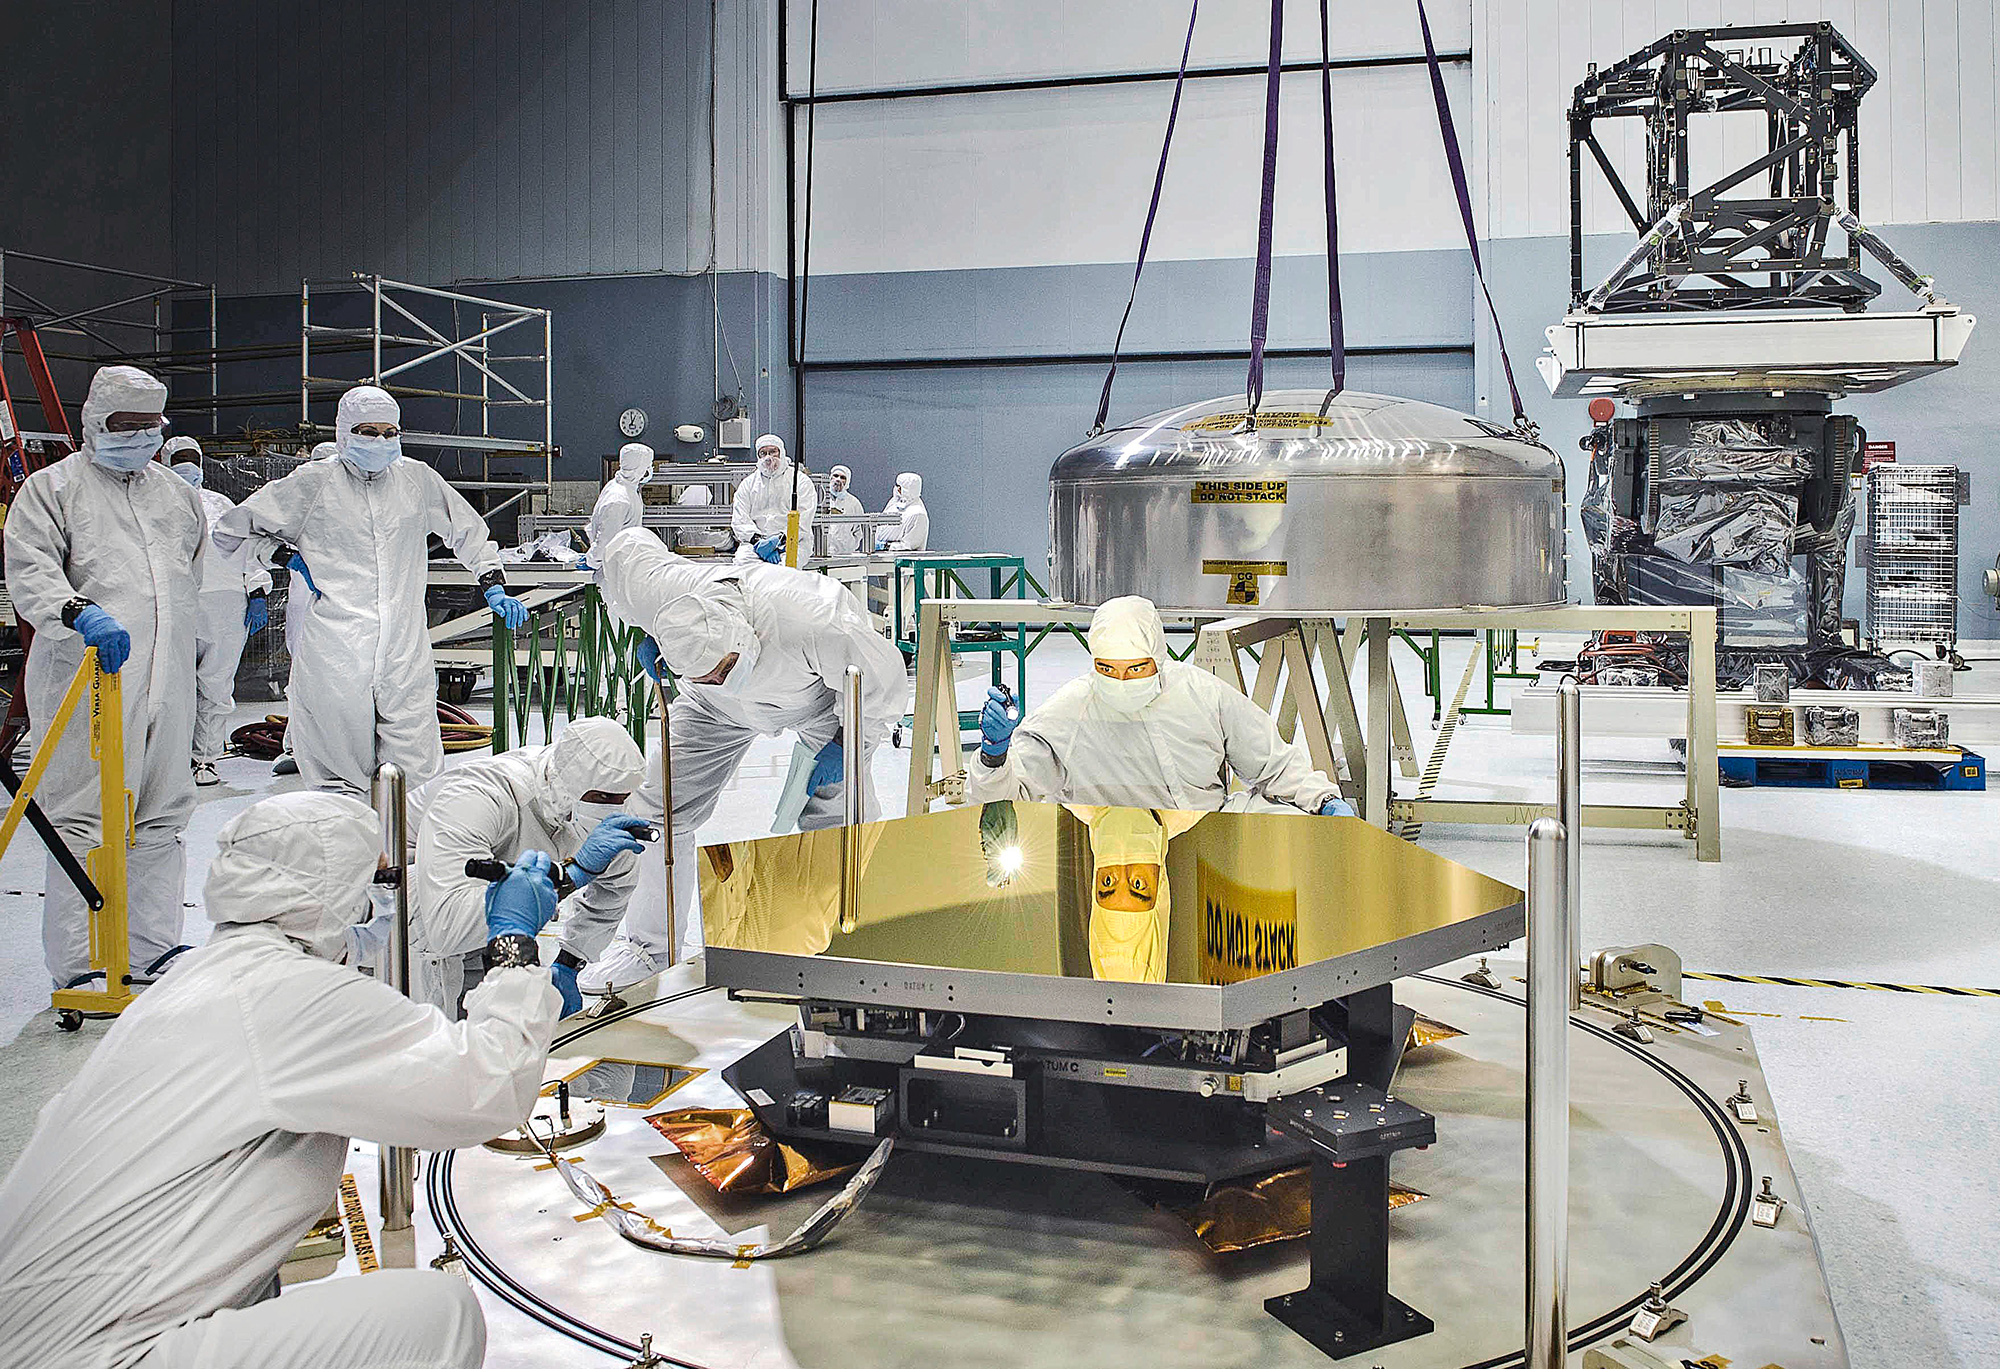 A diverse group of people in white cleanroom suits carefully inspect a single golden faced, hexagonal mirror from the James Webb Space Telescope. Many faces all stare intently, some using flashlights, to examine the mirror surface. Reflected on the surface is the face and intense eye contact from one engineer, and the bright reflection of his flashlight shining directly at the viewer. Behind this engineer, a stainless-steel lens cap used to safely transport the mirror, nearly the size of a human body, rests on scaffolding, still attached by ropes to the crane that lifted it off the mirror moments before. In the background, gray and light blue walls lay behind several other components of Webb scattered around the cleanroom floor. To the right of the frame, a structure made of long overlapping black struts that appear like scaffolding sits on top of a lift table that is meant to safely move the structure up and down.